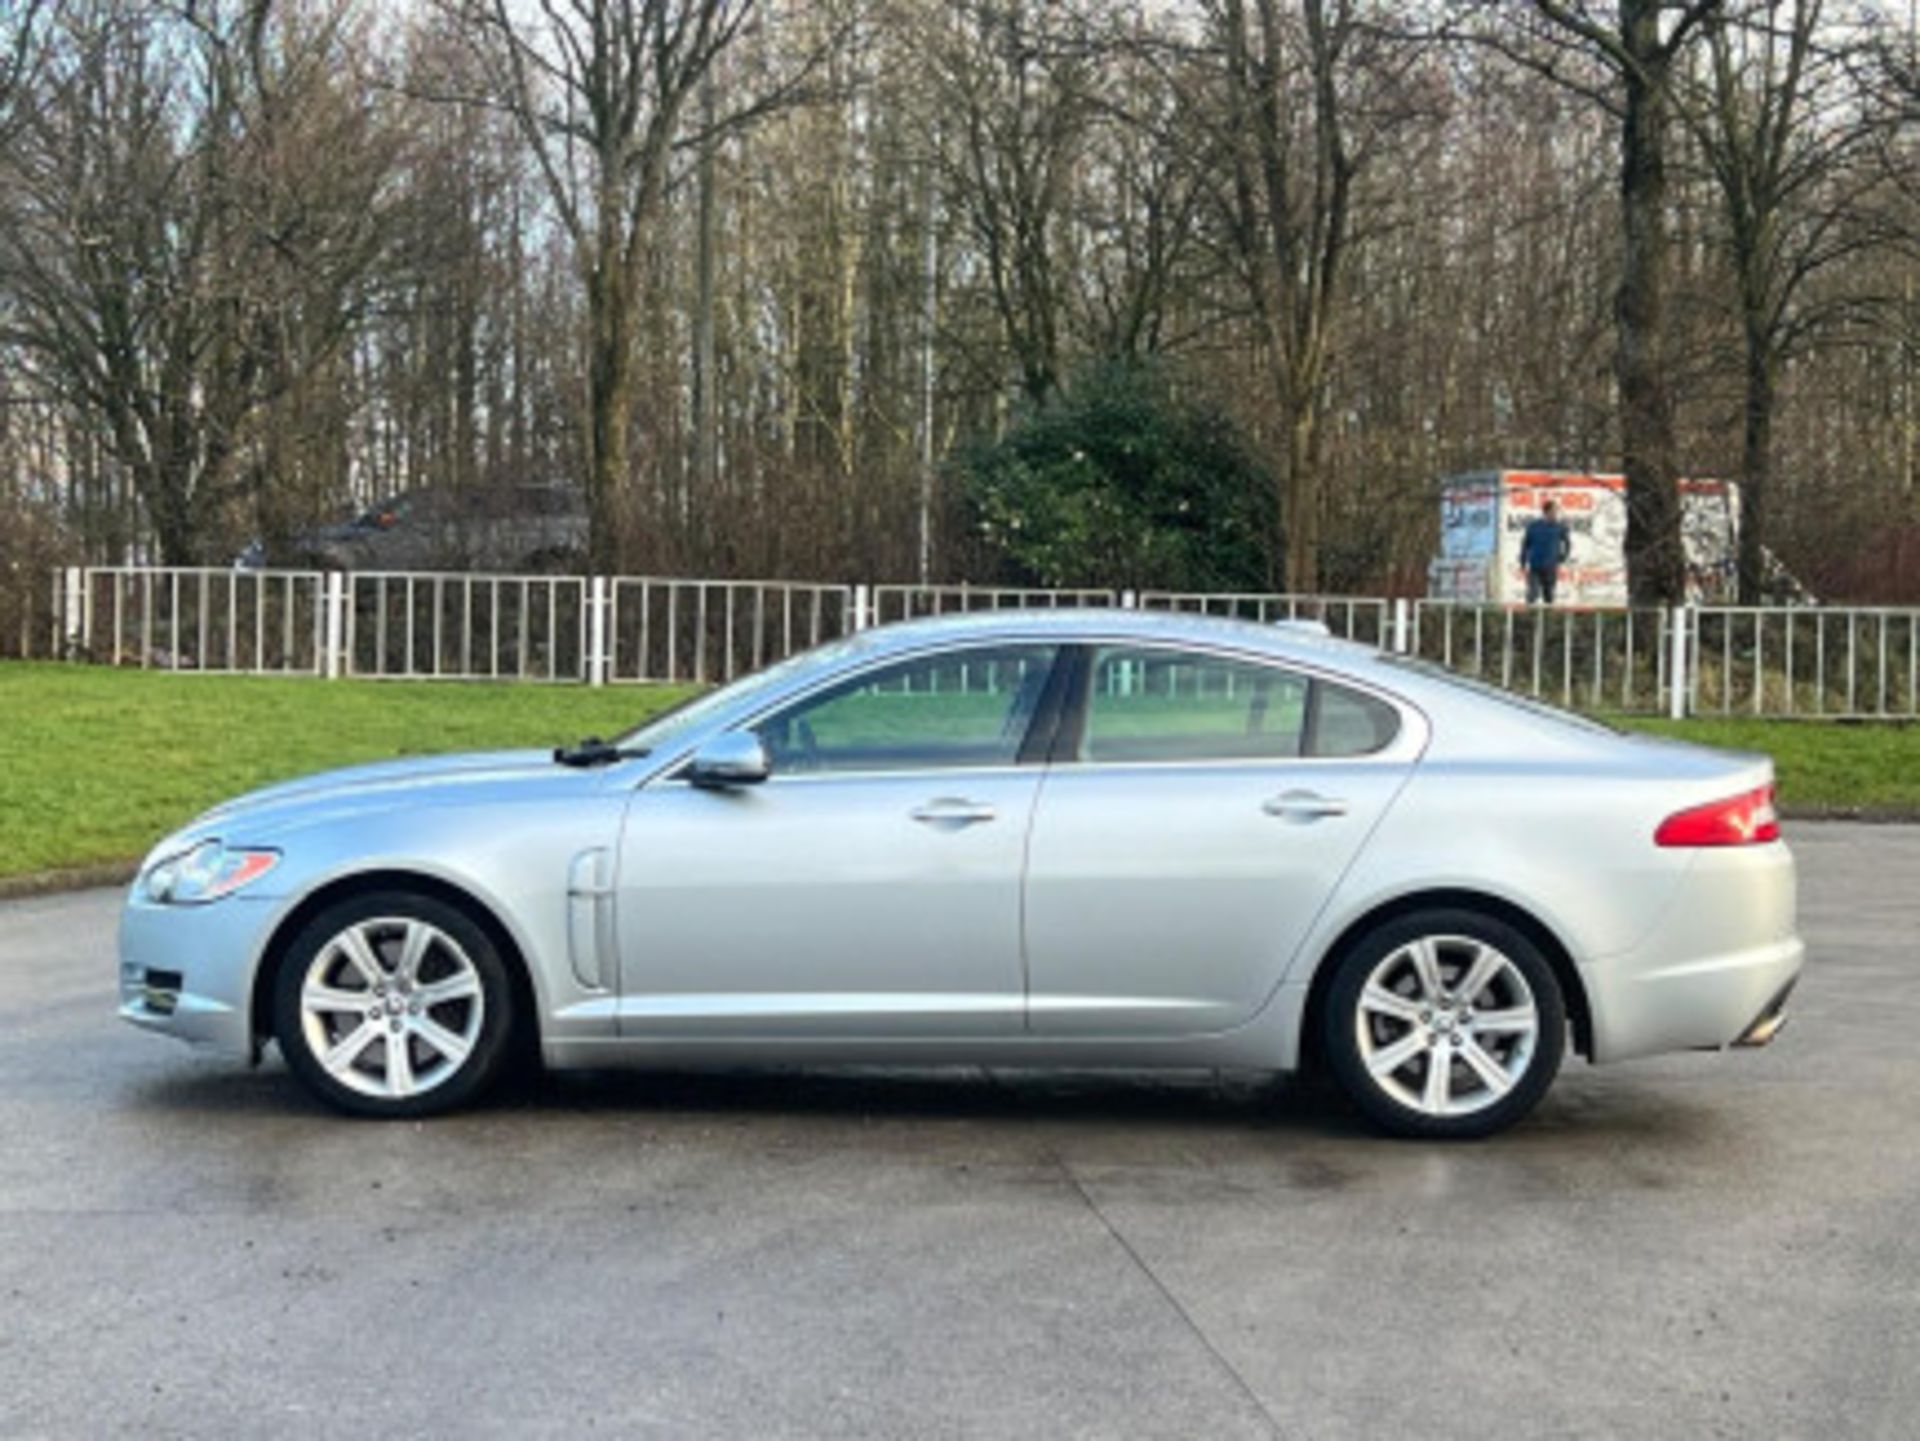 LUXURIOUS JAGUAR XF 3.0D V6 LUXURY 4DR AUTOMATIC SALOON >>--NO VAT ON HAMMER--<< - Image 35 of 80